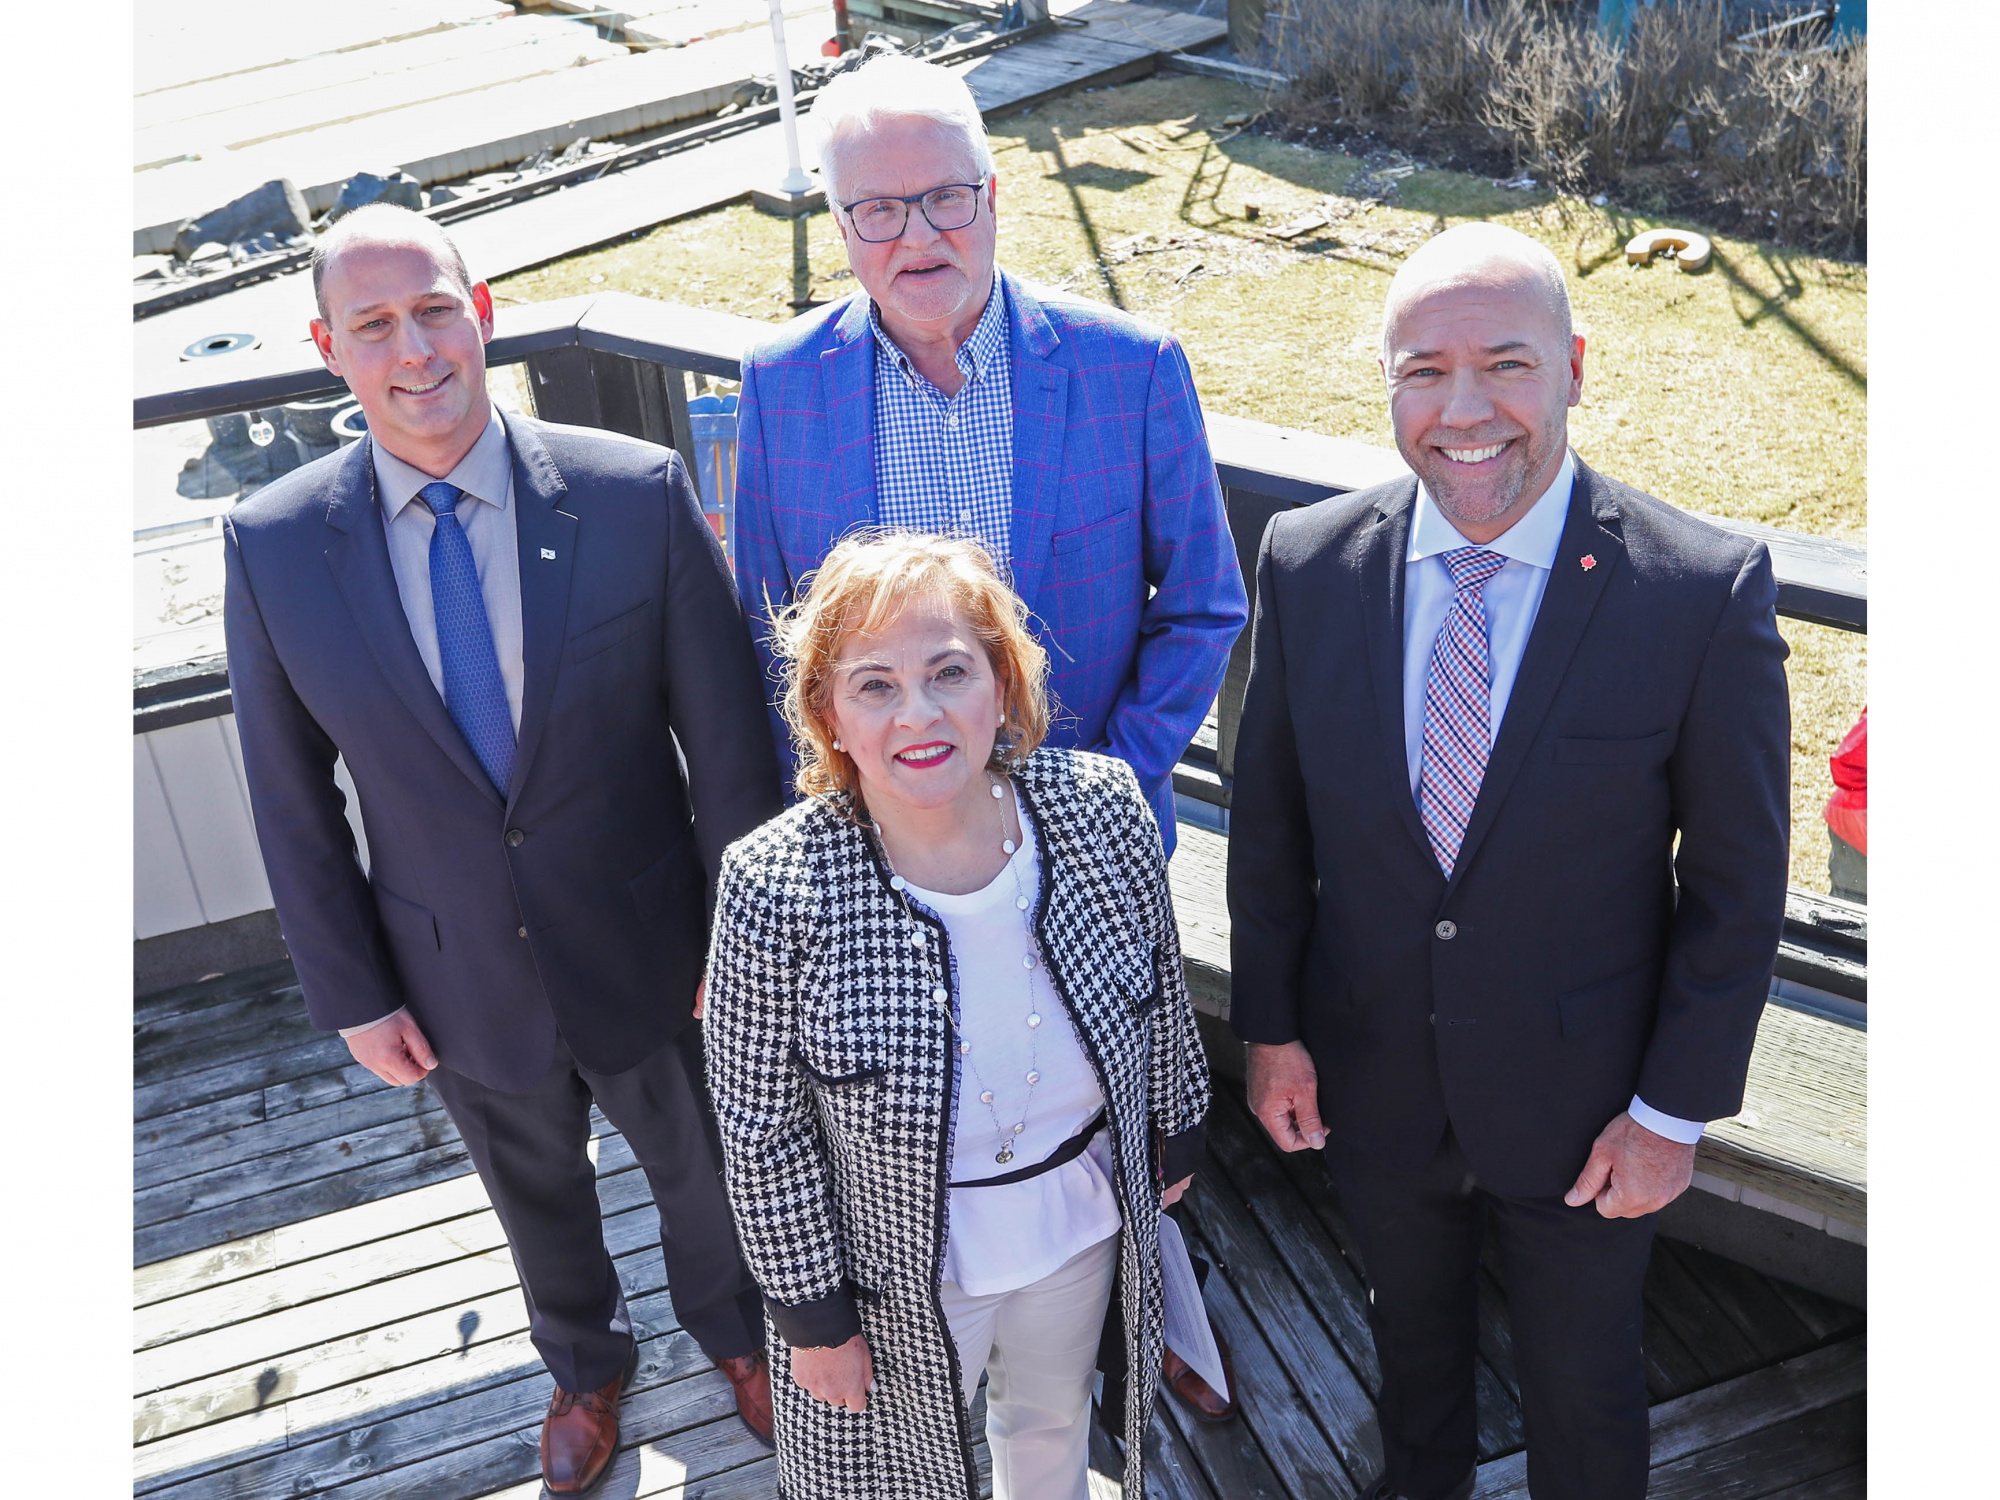 Environment and Climate Change Minister Timothy Halman, HRM Councillor Tim Outhit, Halifax Member of Parliament Andy Fillmore and Halifax West Member of Parliament Lena Metlege Diab at the Bedford Basin Yacht Club after a funding announcement 